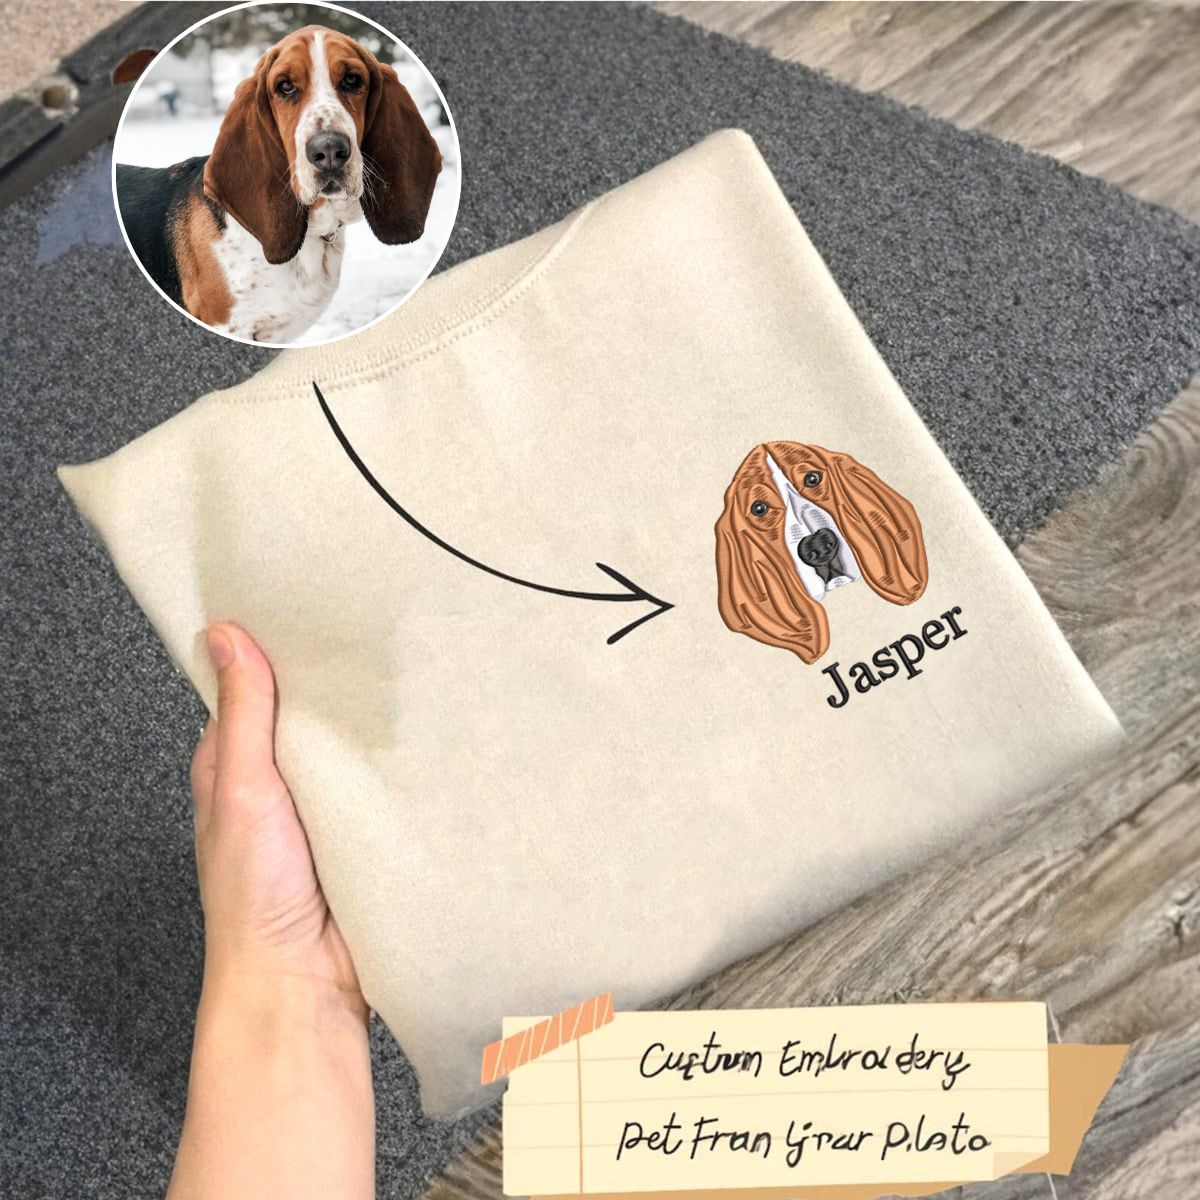 🐶👕 Looking for the paw-fect way to show your love for Basset Hounds? Our embroidered photo dog name t-shirt is here to steal your heart! 📸💕 Share your furry friend's adorable face for any dog lover.🐾😍 #BassetHoundLove #DogLoverTee #EmbroideredShirts
goozent.com/basset-hound-t…